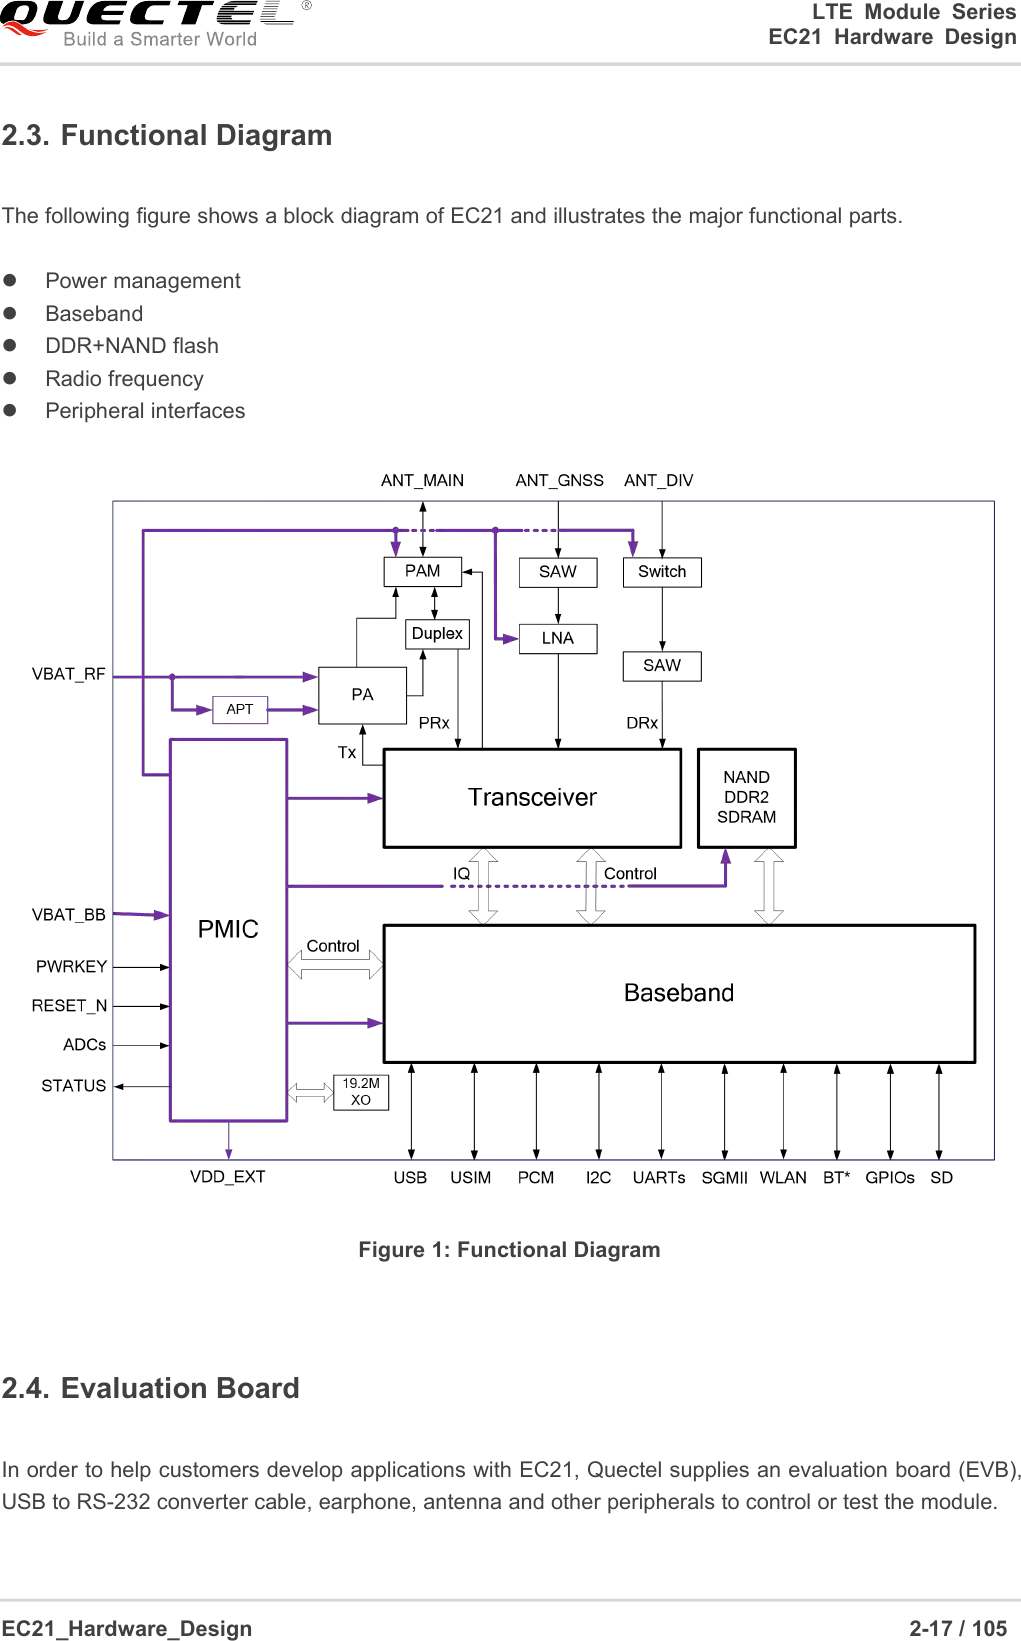 LTE Module SeriesEC21 Hardware DesignEC21_Hardware_Design 2-17 / 1052.3. Functional DiagramThe following figure shows a block diagram of EC21 and illustrates the major functional parts.Power managementBasebandDDR+NAND flashRadio frequencyPeripheral interfacesFigure 1: Functional Diagram2.4. Evaluation BoardIn order to help customers develop applications with EC21, Quectel supplies an evaluation board (EVB),USB to RS-232 converter cable, earphone, antenna and other peripherals to control or test the module.